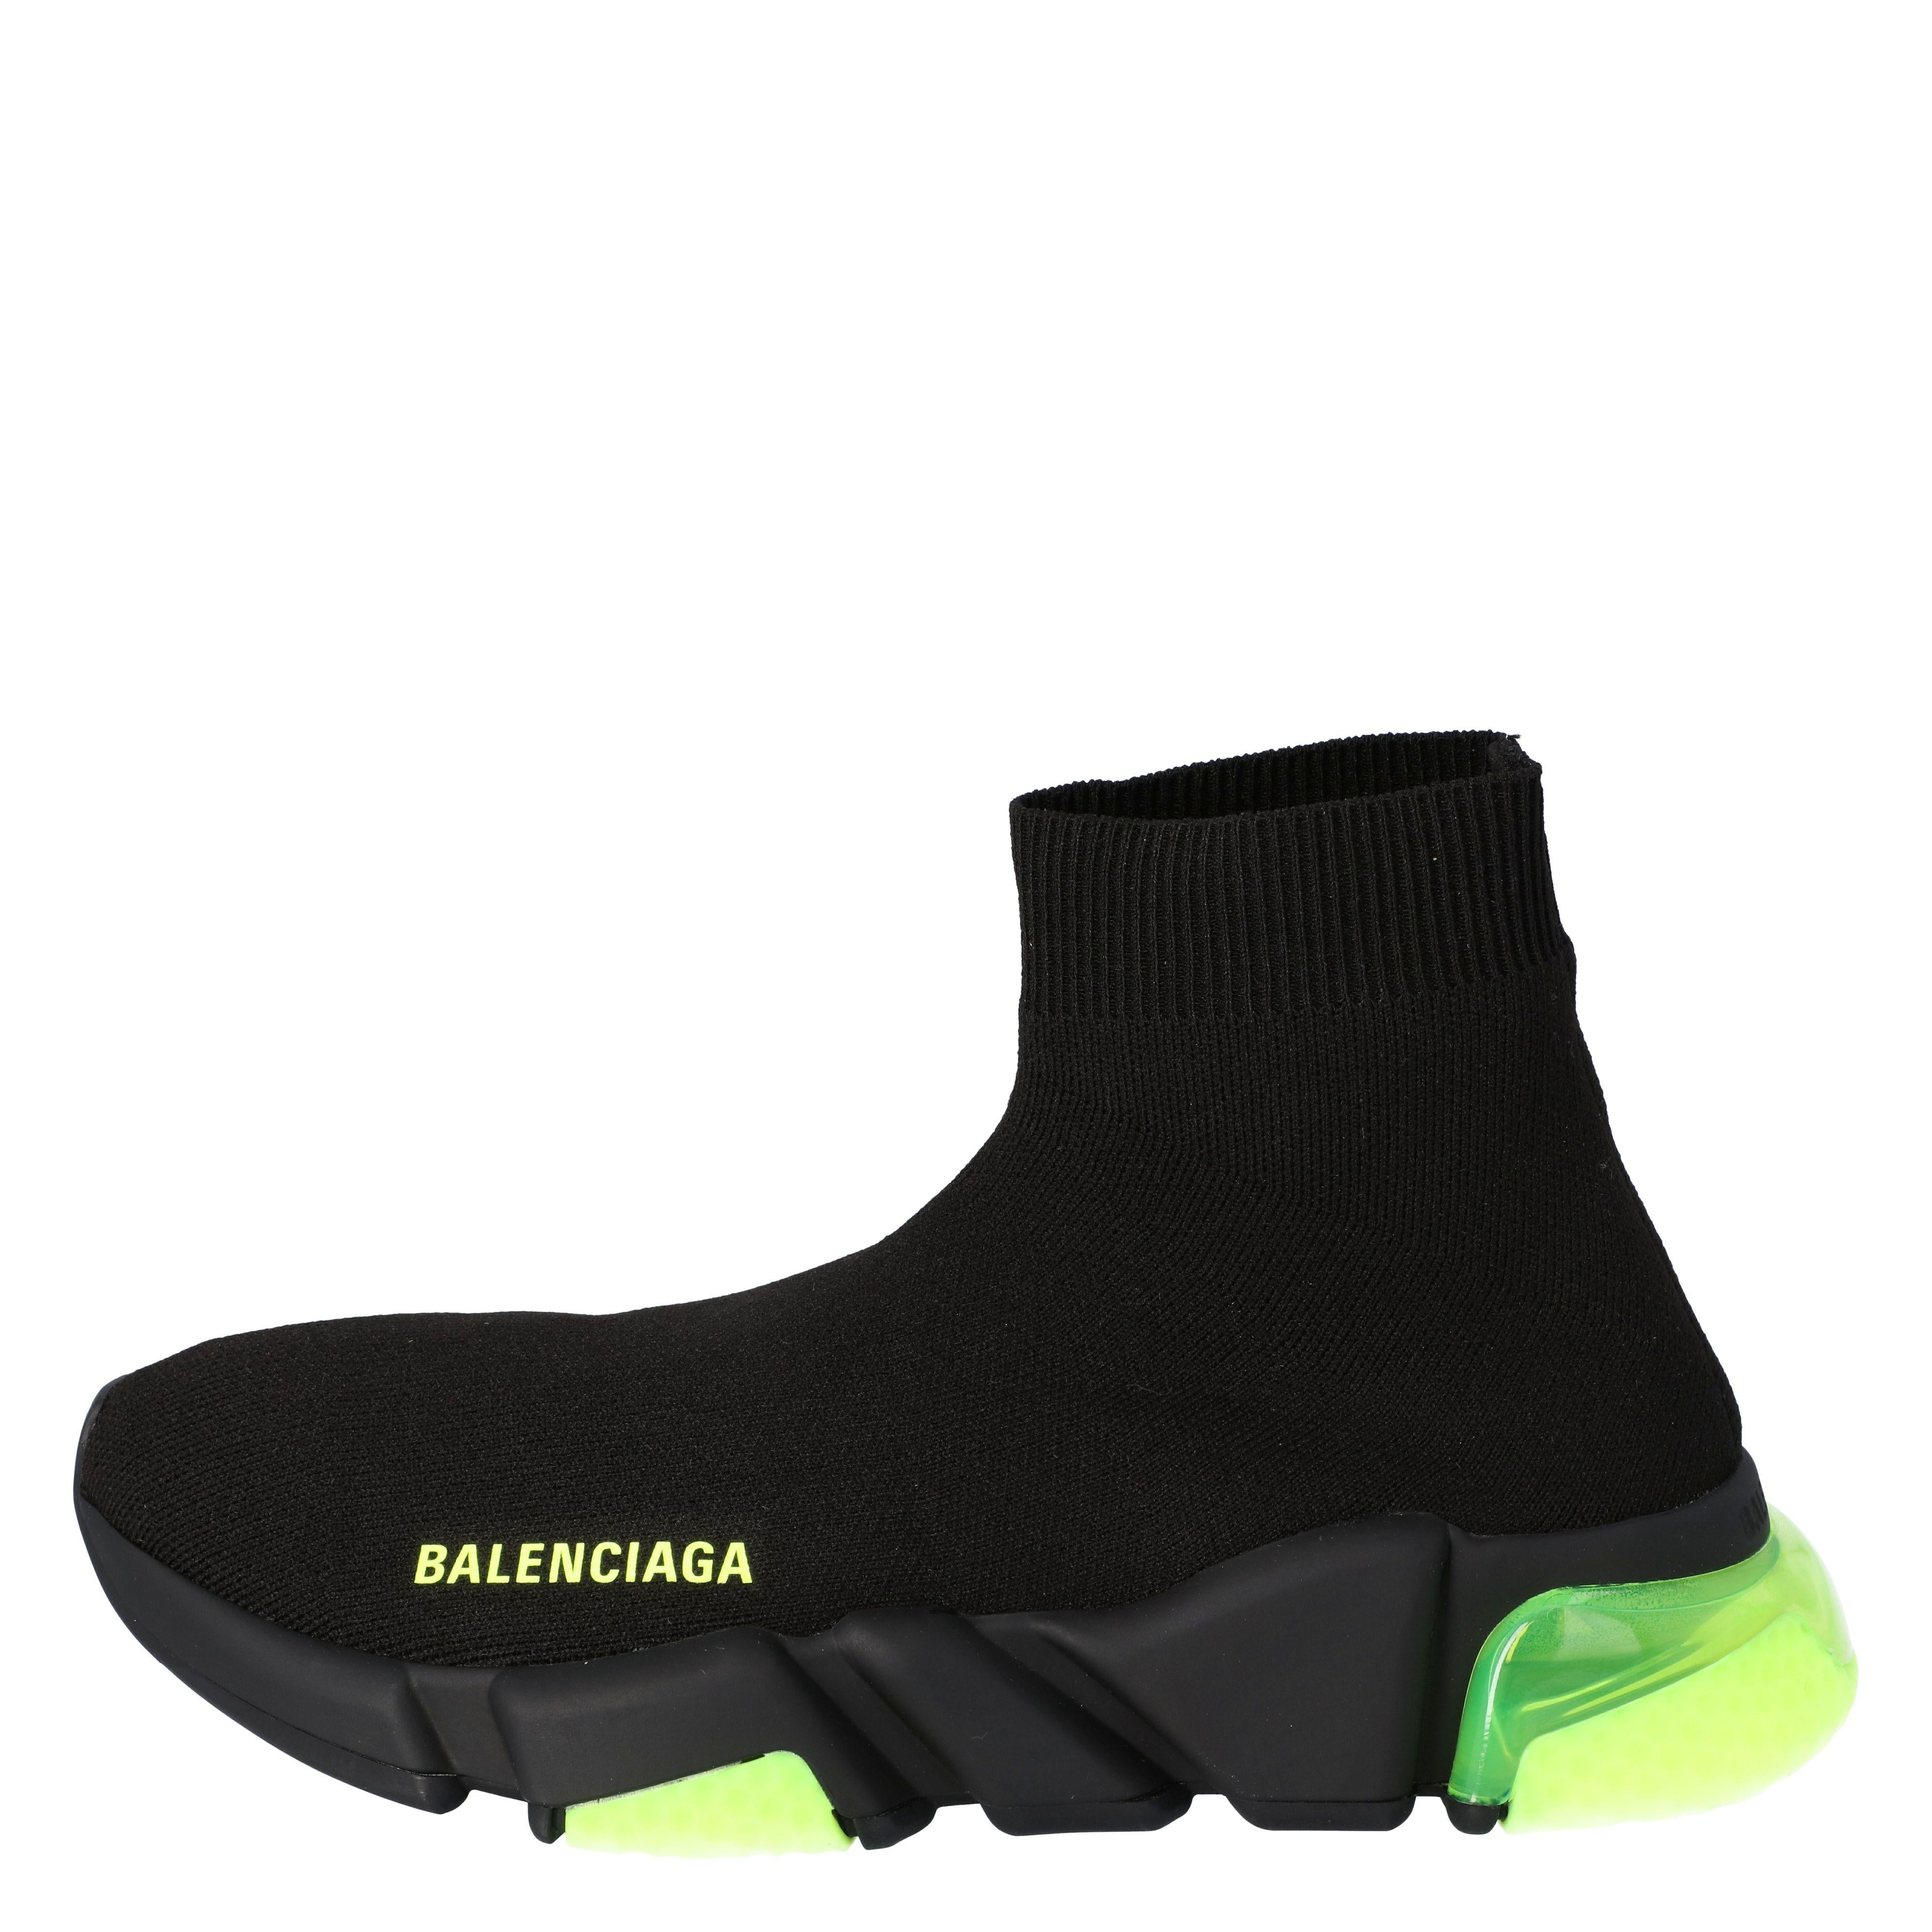 Celebrating the fusion of sports and luxury fashion, these Balenciaga Speed sneakers are absolutely worth the splurge. They are laceless and so well-crafted with breathable knit fabric in a sock style. Fully equipped to give you the best experience,